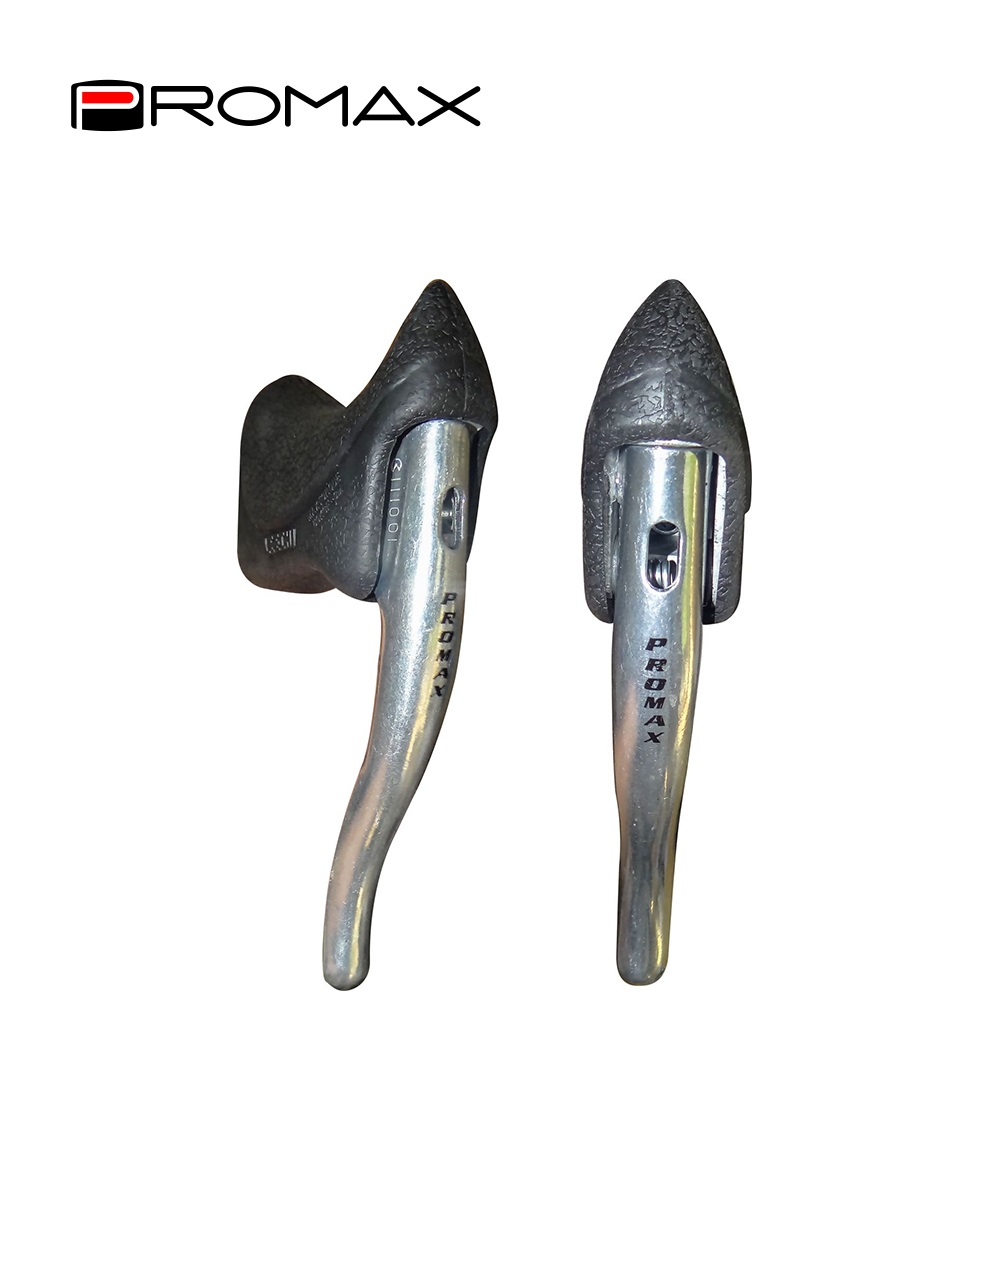 PROMAX Bicycle Accessories, Buy Brake Shoes & Seat Clamp Shop Online